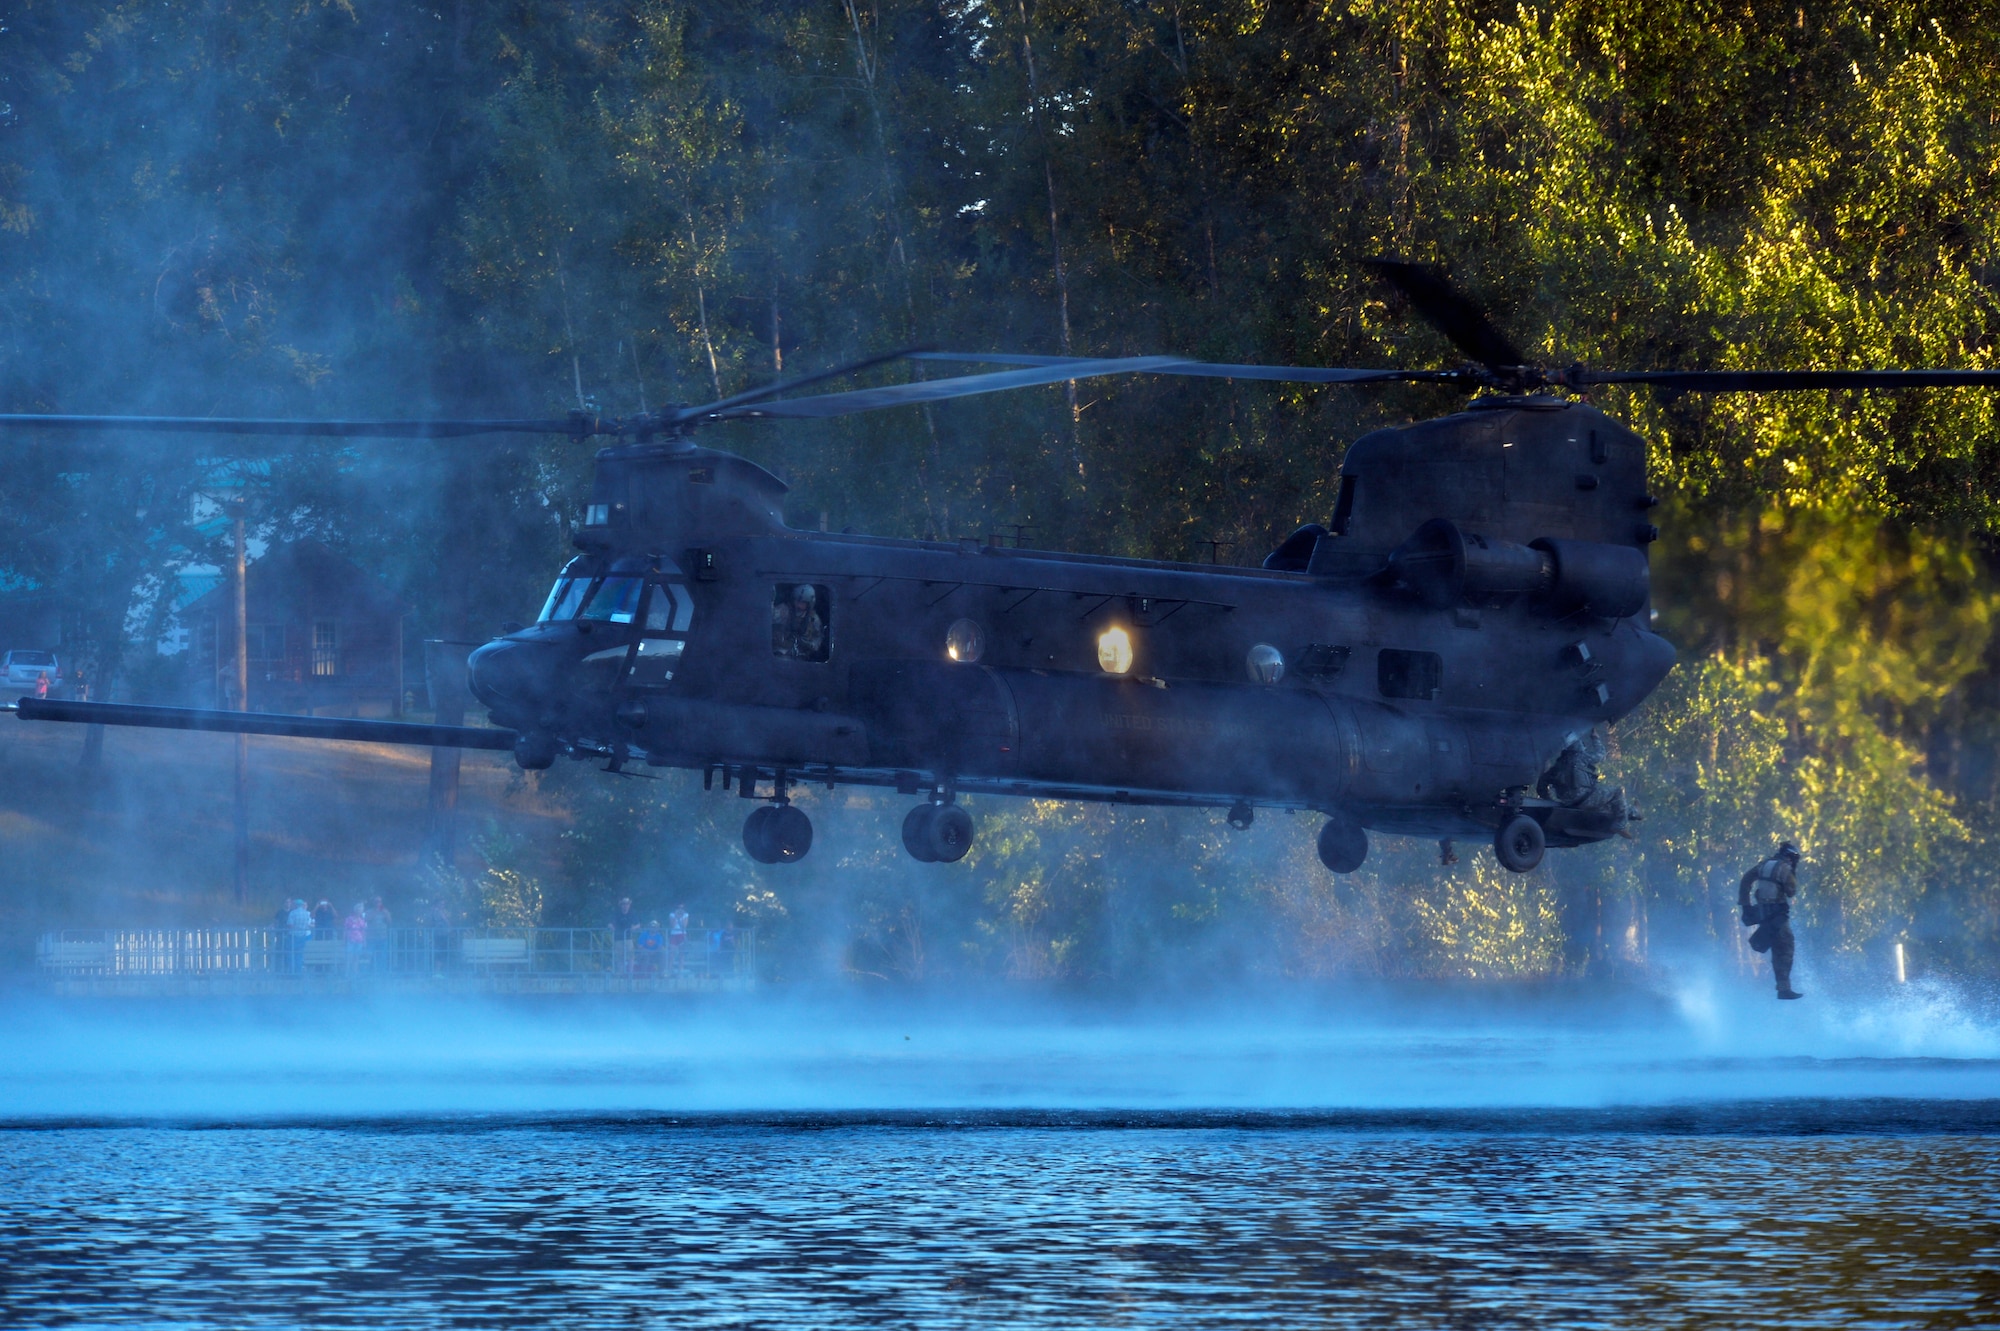 An Airman from the 22nd Special Tactics Squadron’s Red Team jumps out of an MH-47 Chinook helicopter July 14, 2014, during helocast alternate insertion and extraction training with Soldiers from the 160th Special Operations Aviation Regiment at American Lake on Joint Base Lewis-McChord, Wash. The 160th SOAR was tasked with AIE training and called the 22nd STS in hopes their Airmen would have the training requirement to take part in the exercise. (U.S. Air Force photo/Staff Sgt.Russ Jackson)